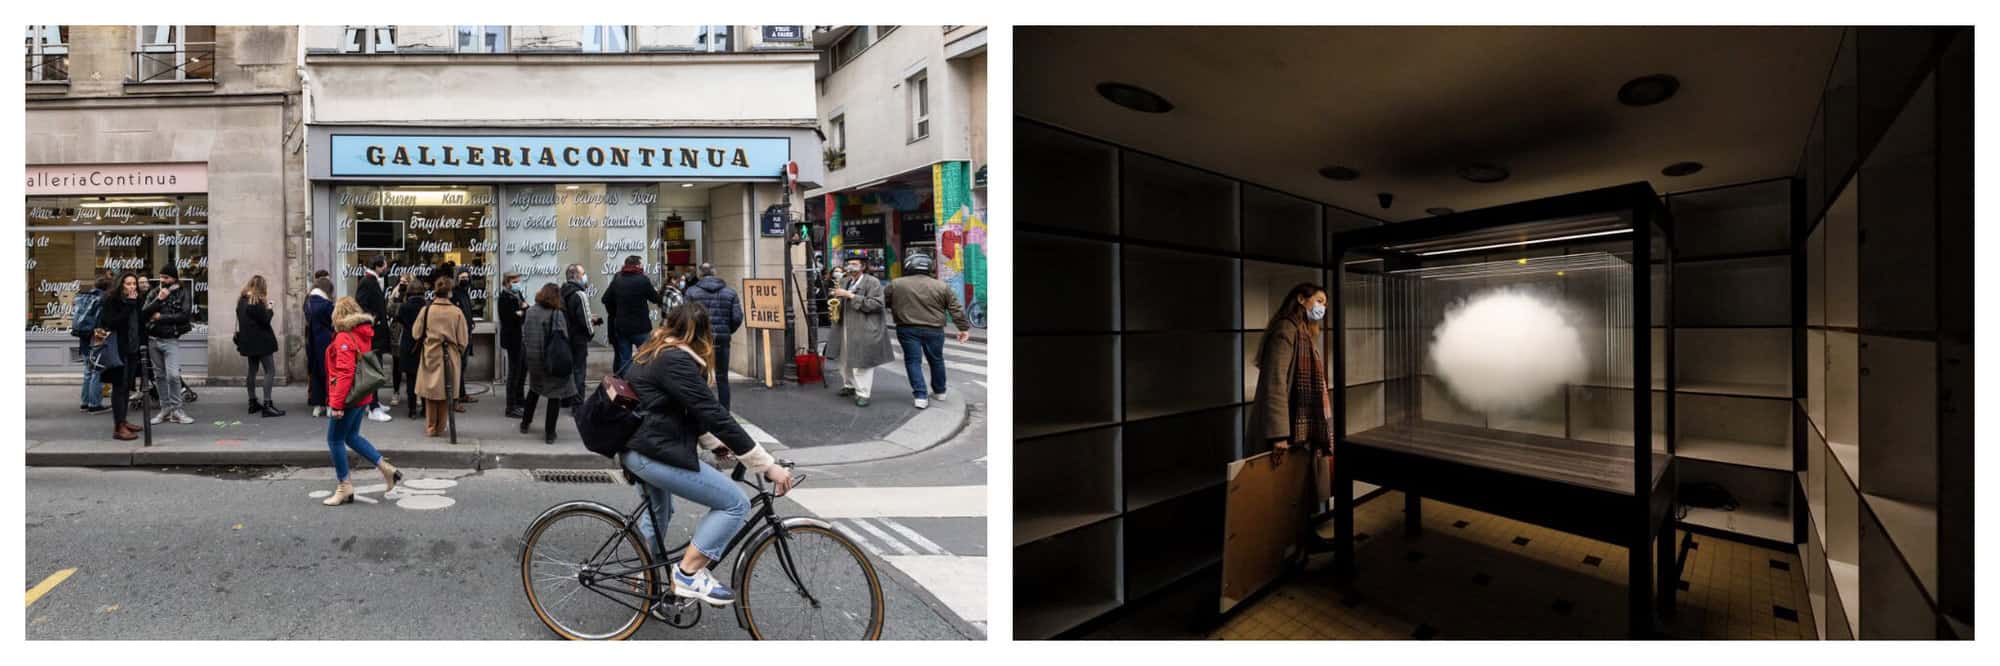 Left: an exterior shot of Galleria Continua in Paris, with people lining up to enter and a woman riding past on a bike. Right: a woman observing an artwork inside Galleria Continua. 